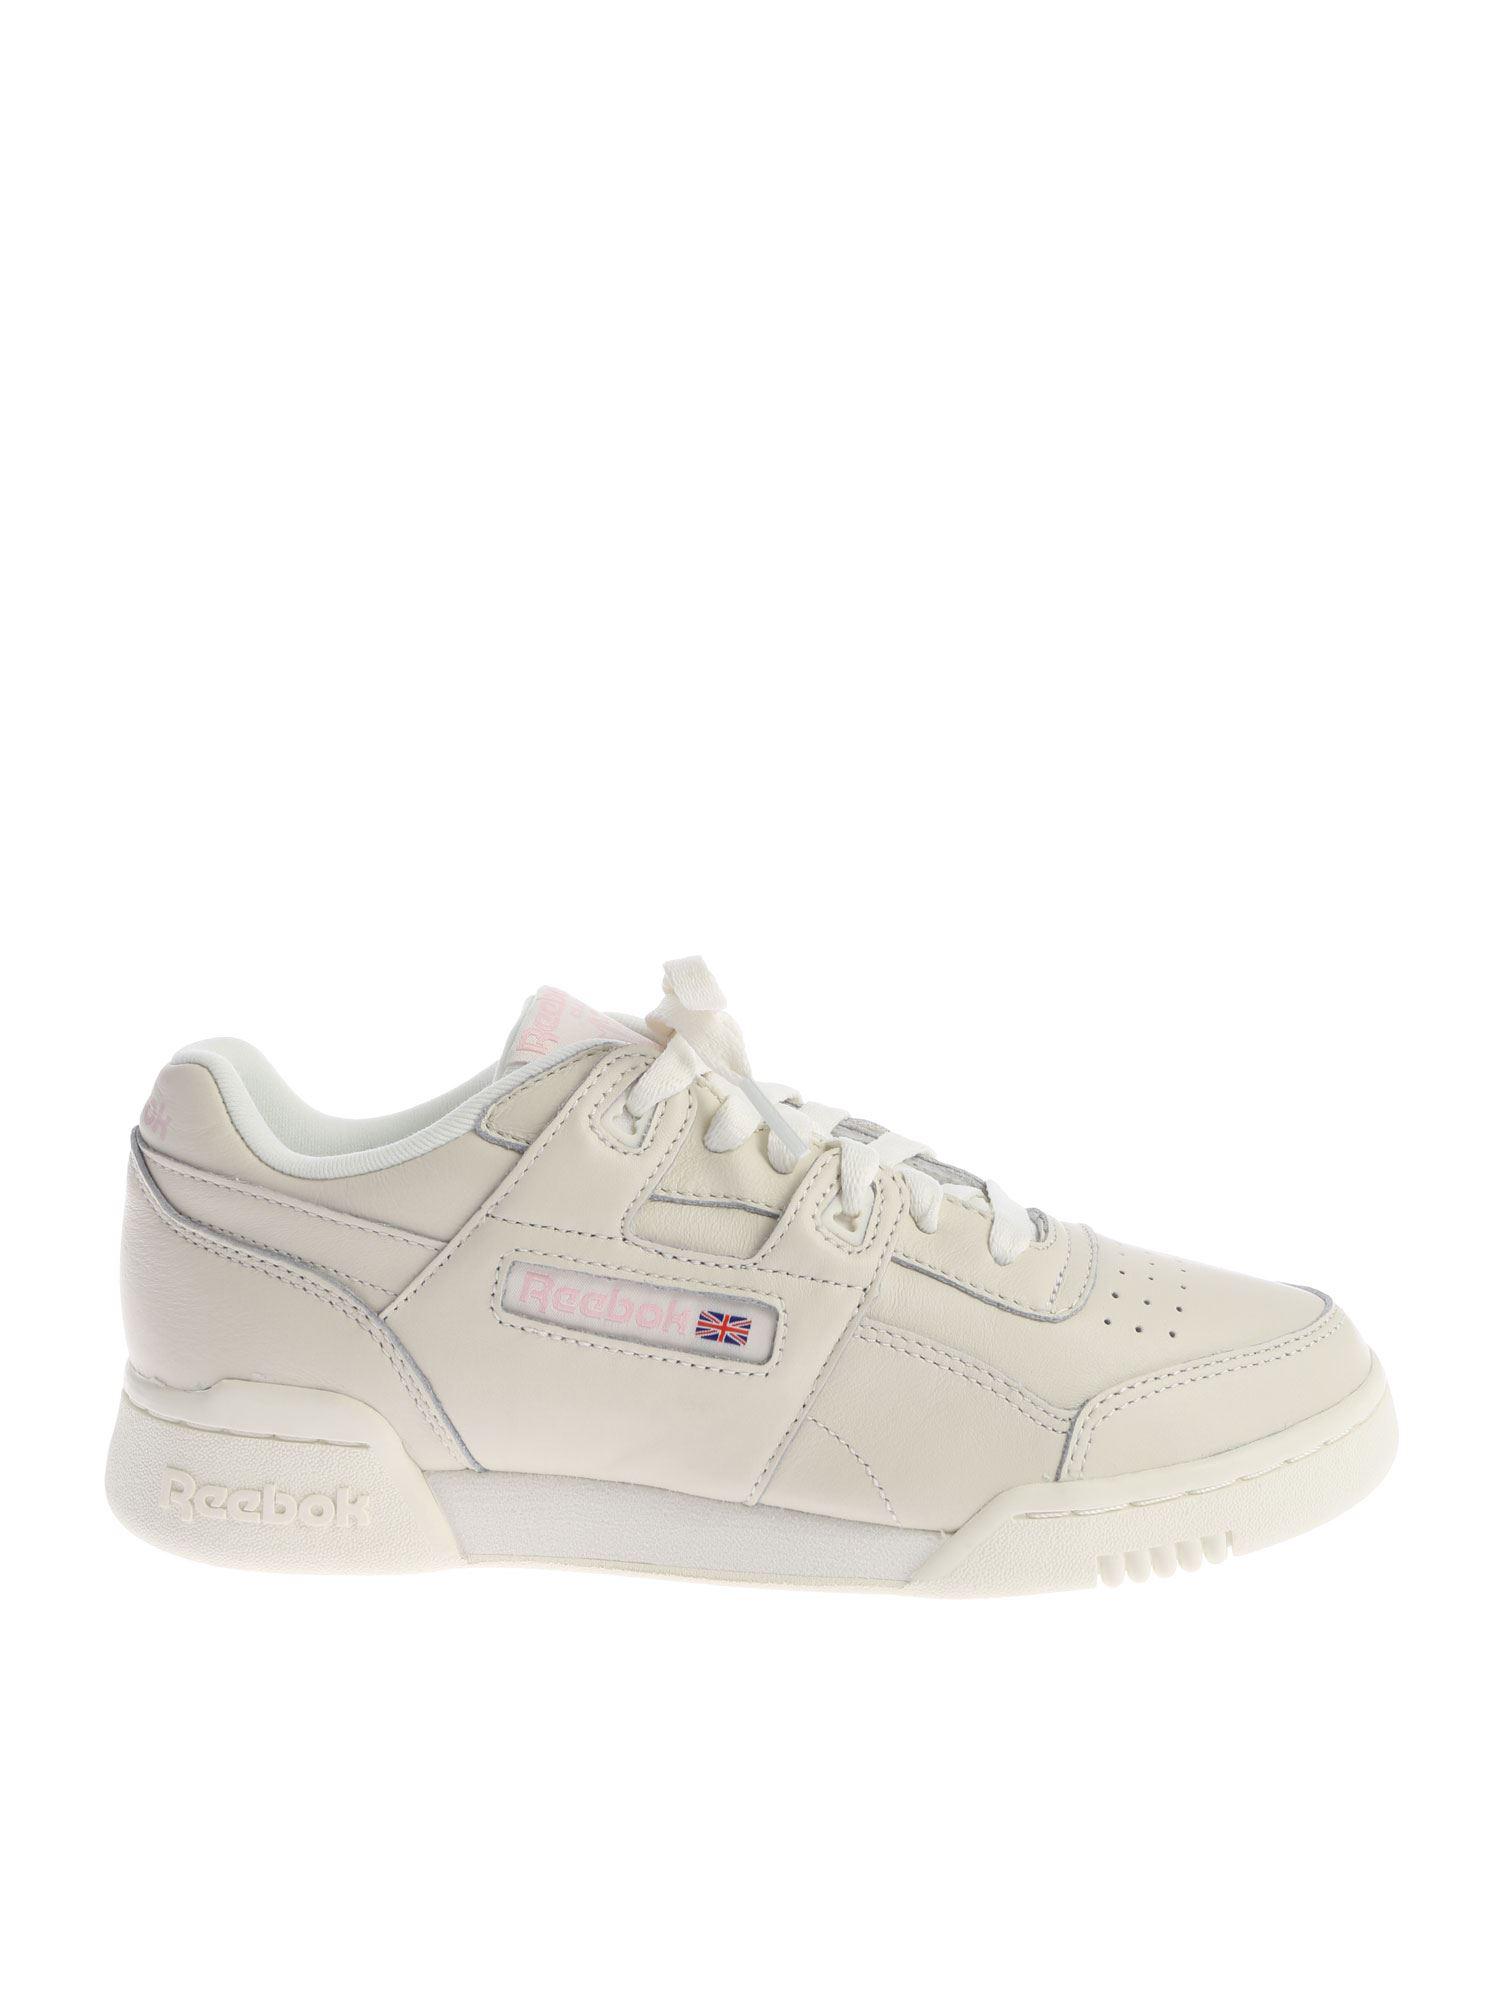 Reebok Leather Creamcolored "workout Lo Plus" Sneakers in